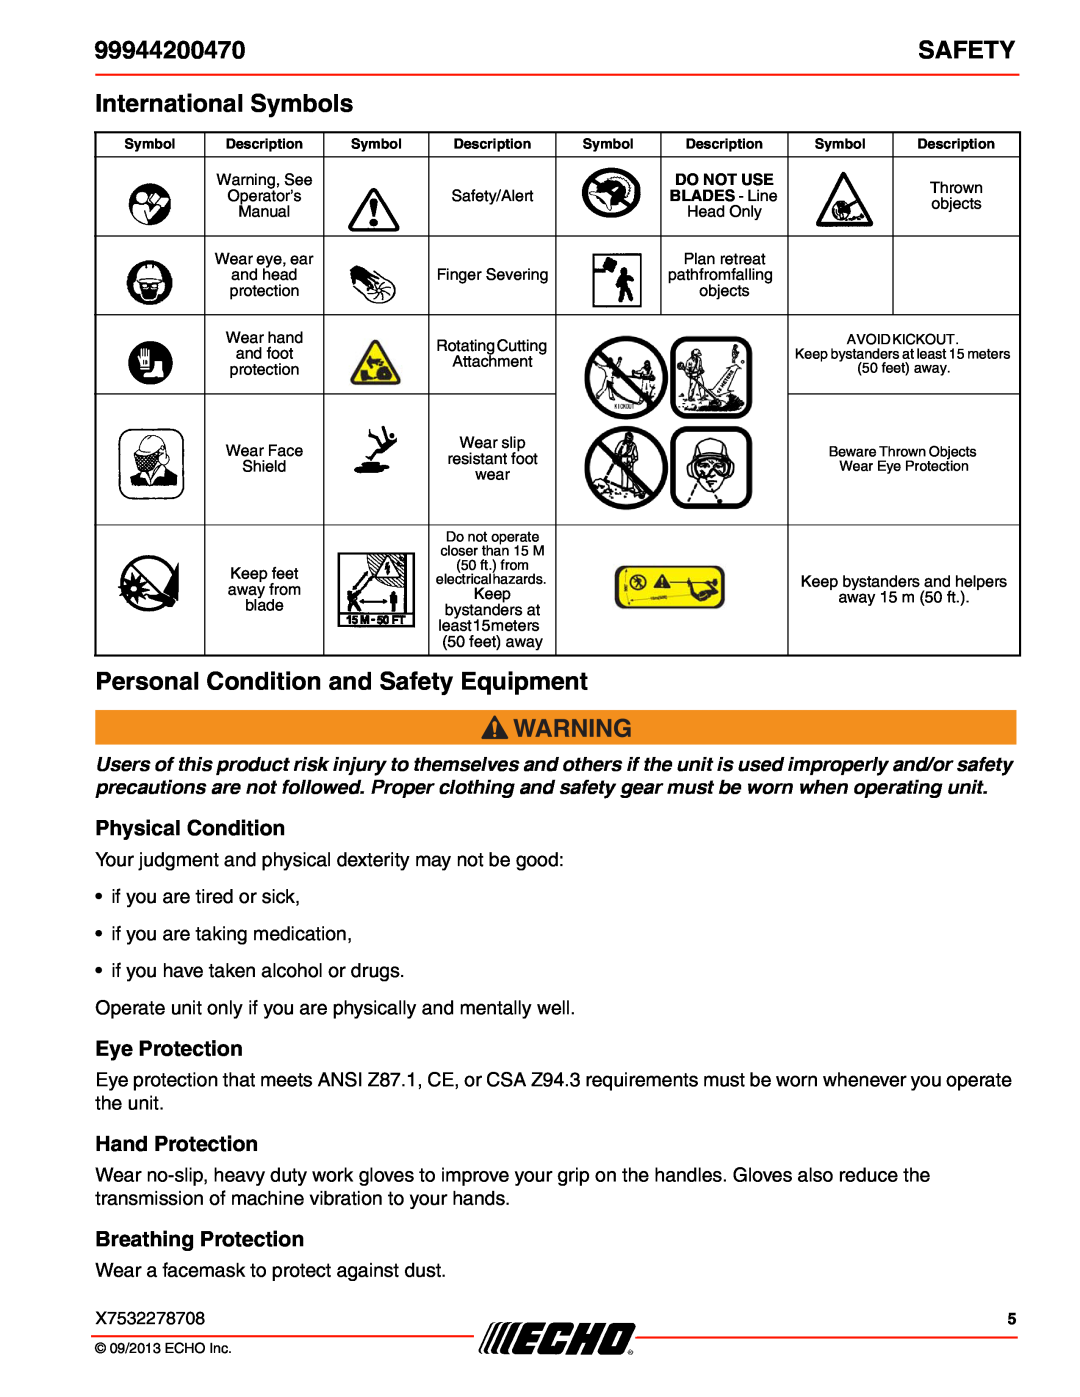 Echo 99944200470 International Symbols, Personal Condition and Safety Equipment, Physical Condition, Eye Protection 